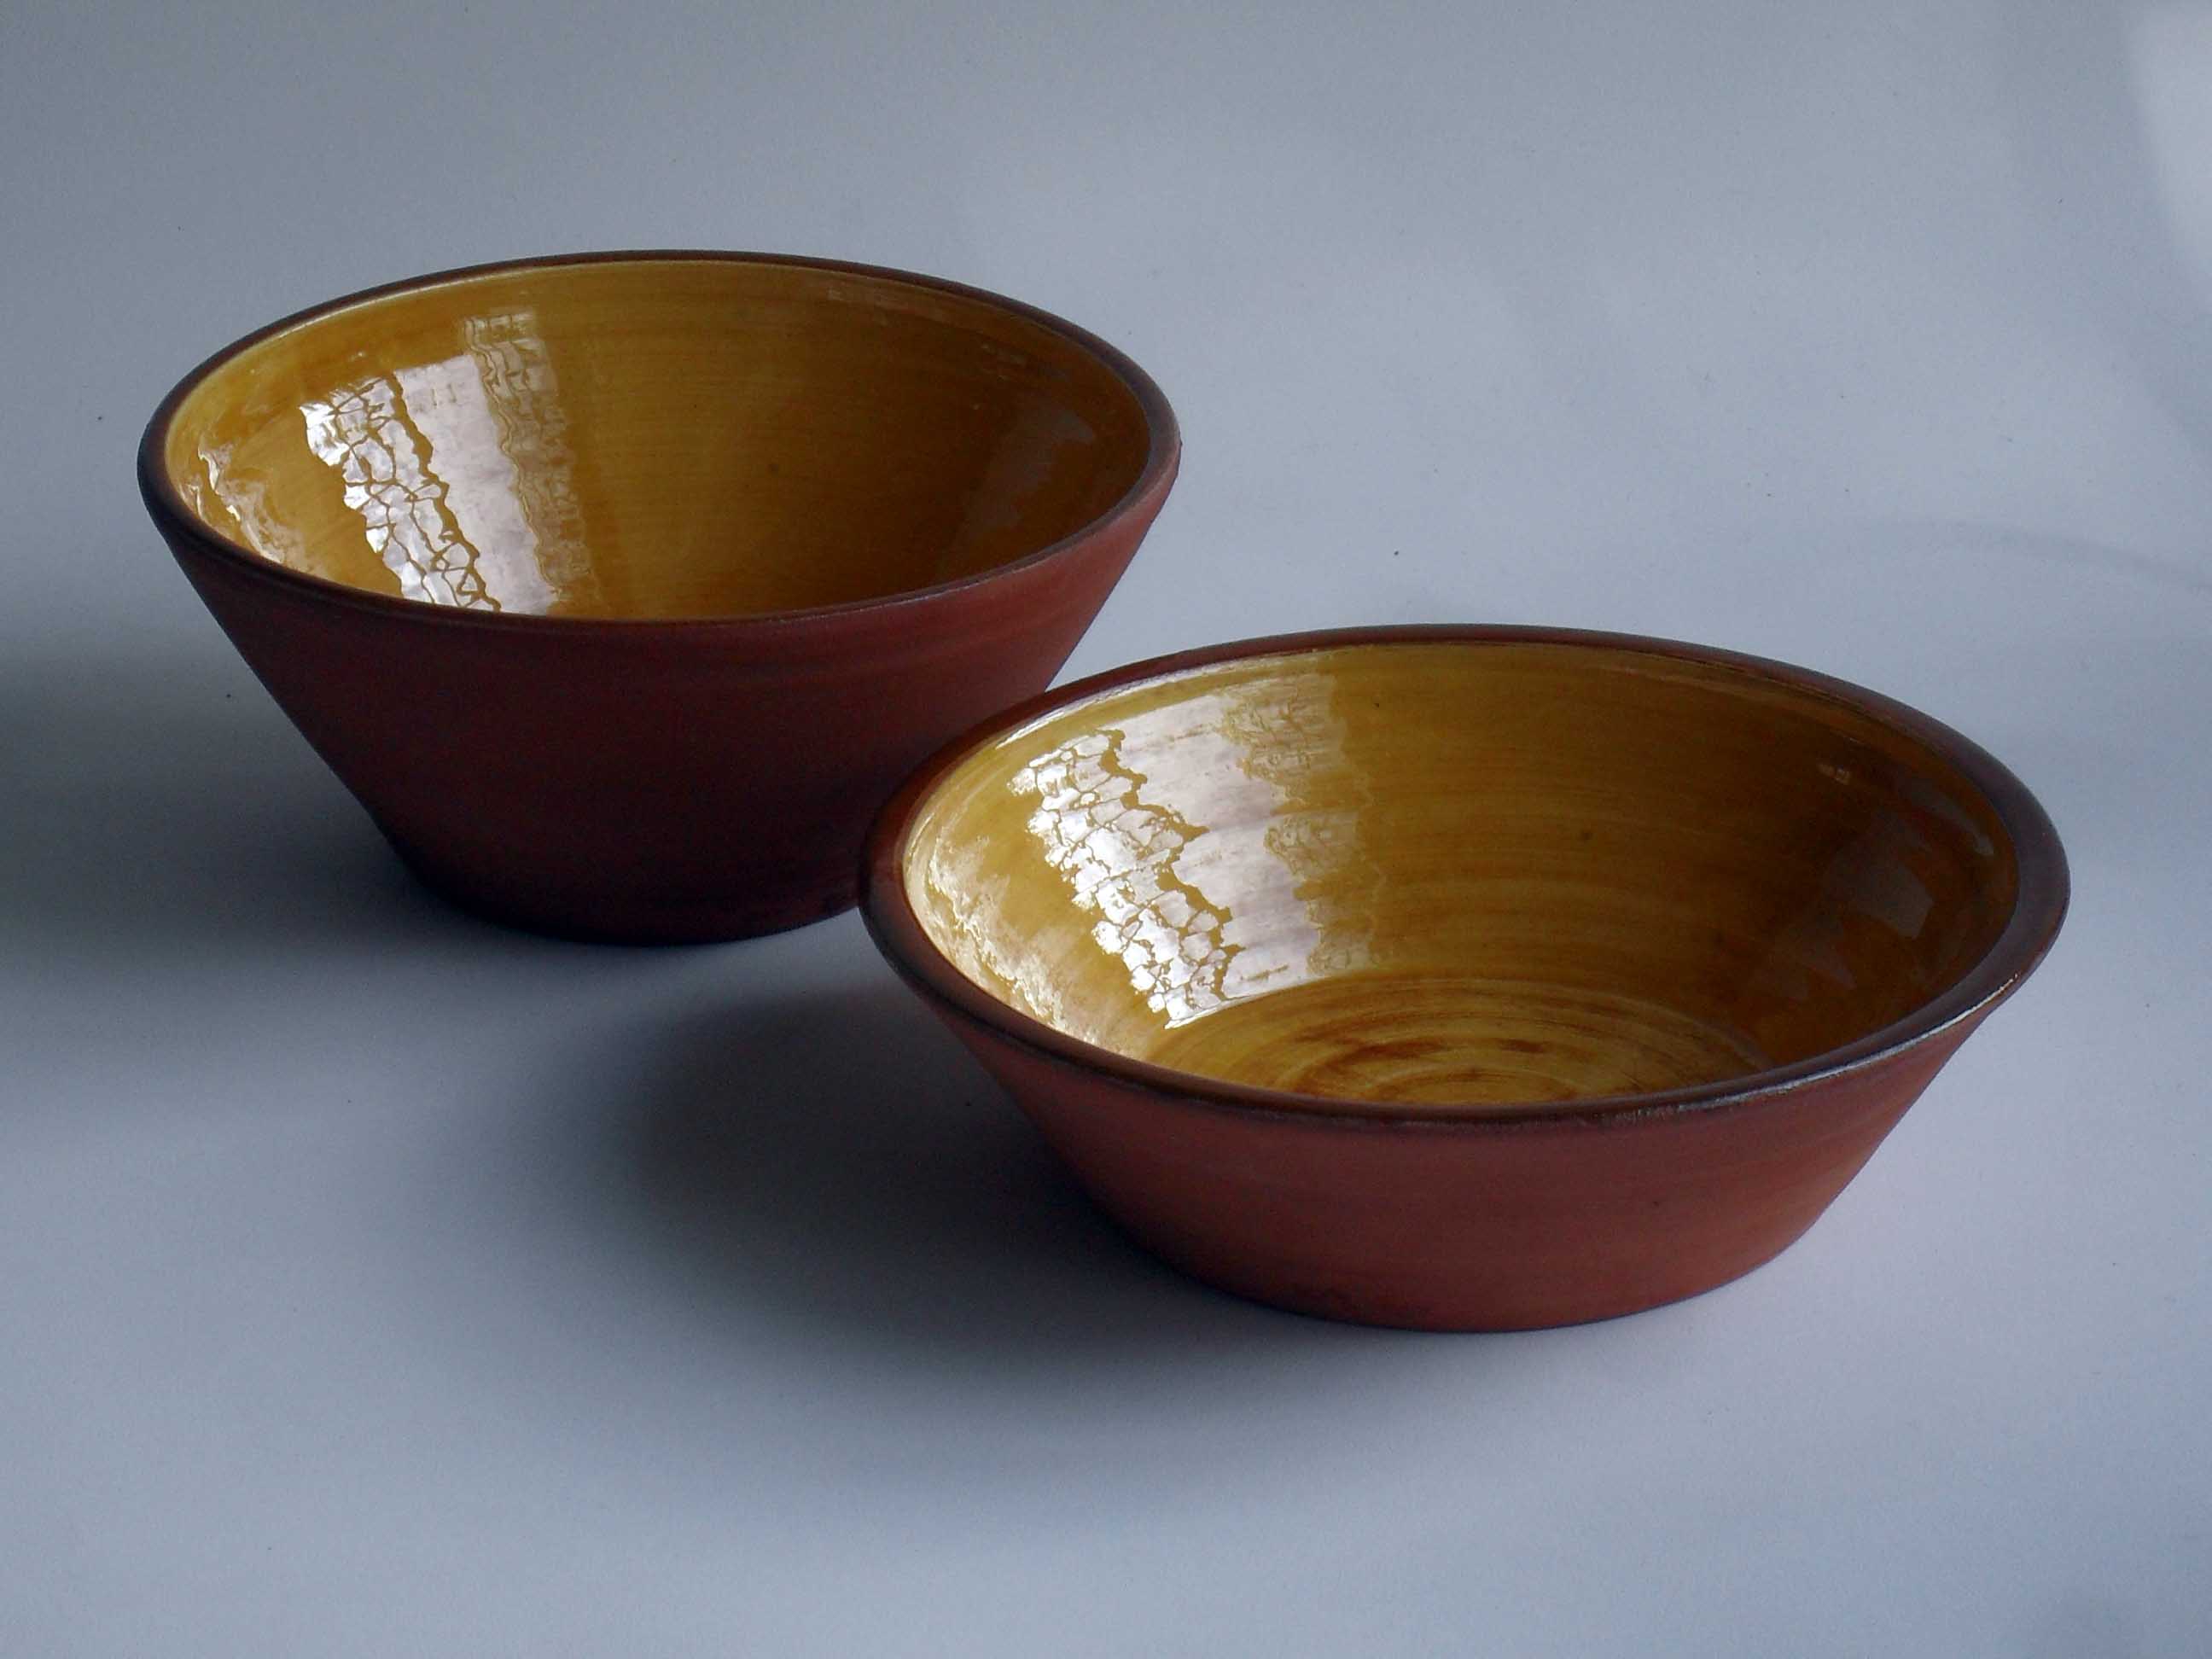 Two Earthenware Bowls With A Yellow Iron Oxide Glaze